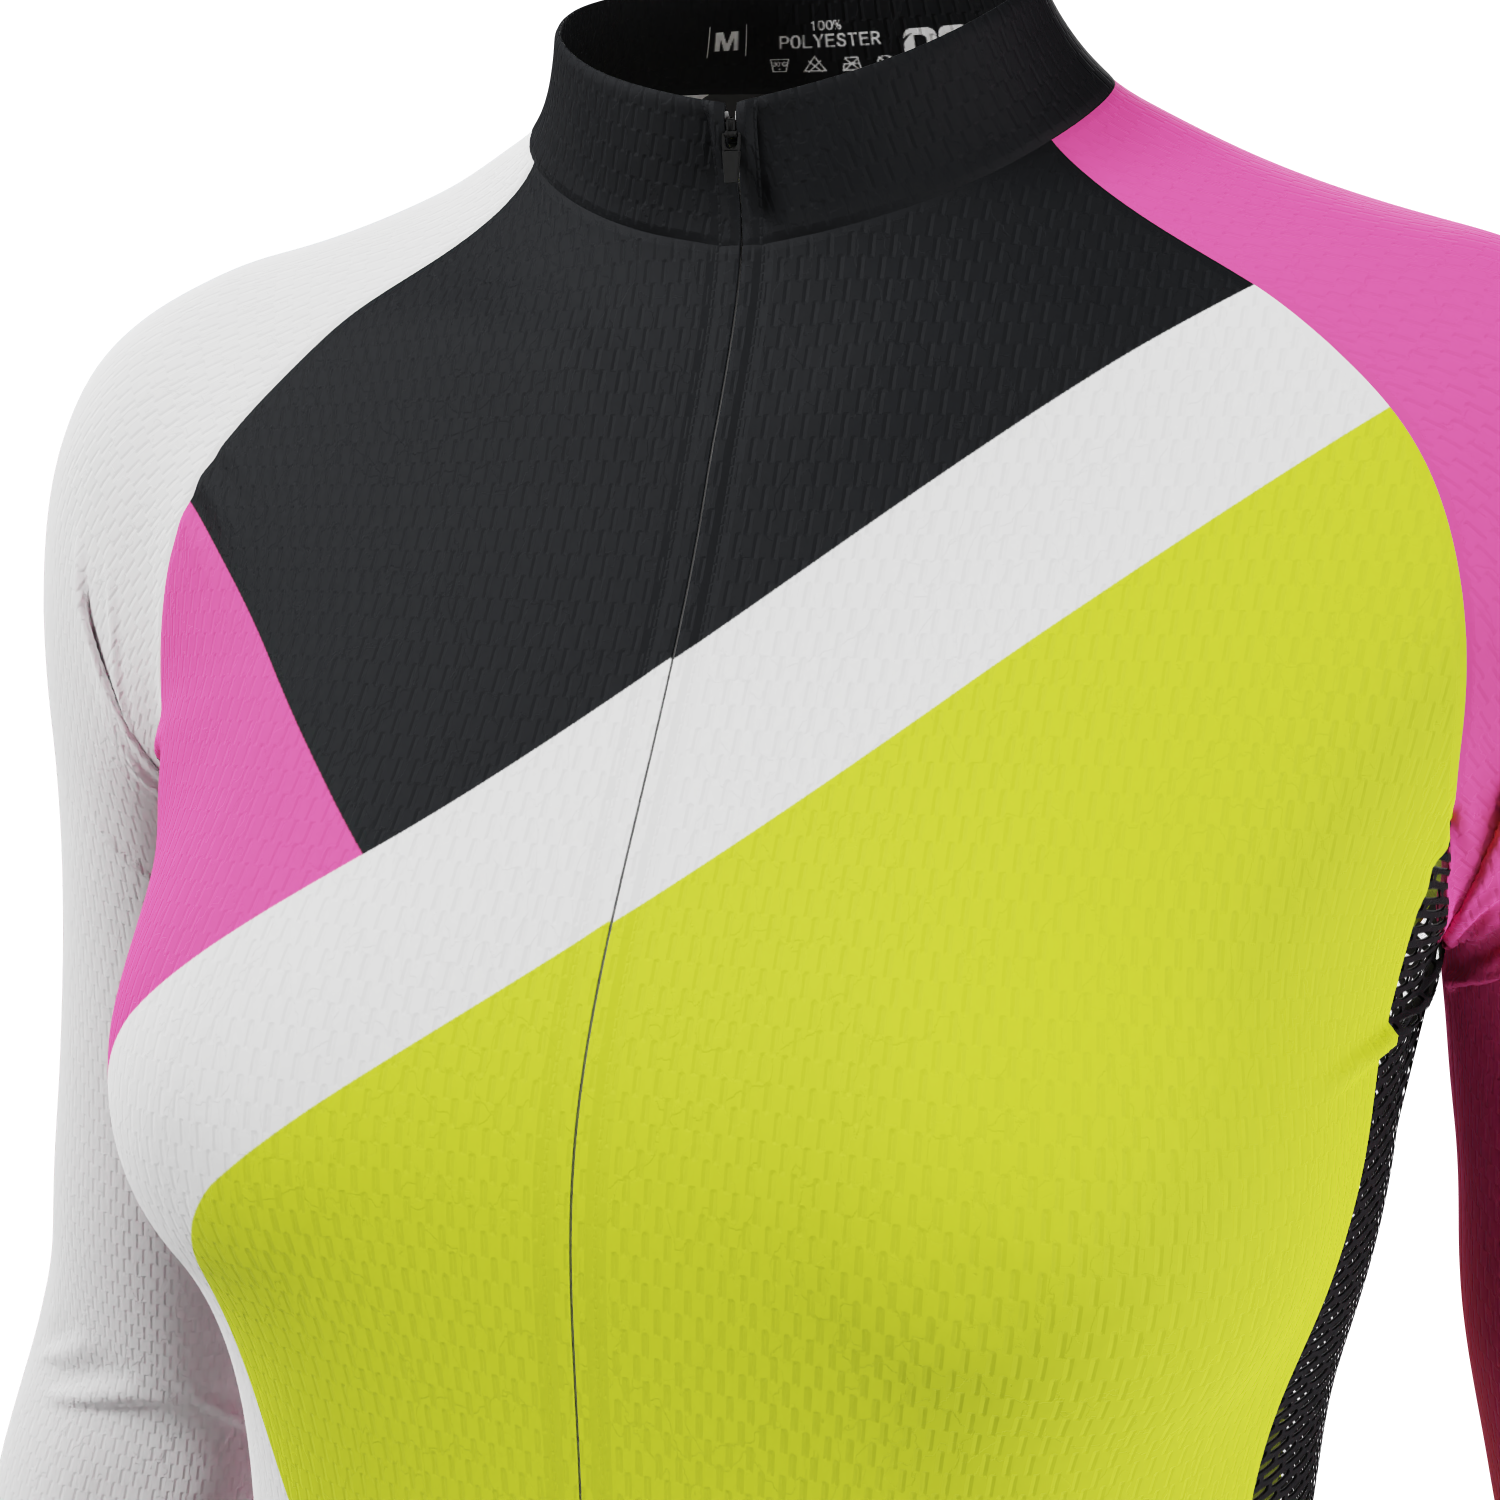 Women's Two Halves Long Sleeve Cycling Jersey